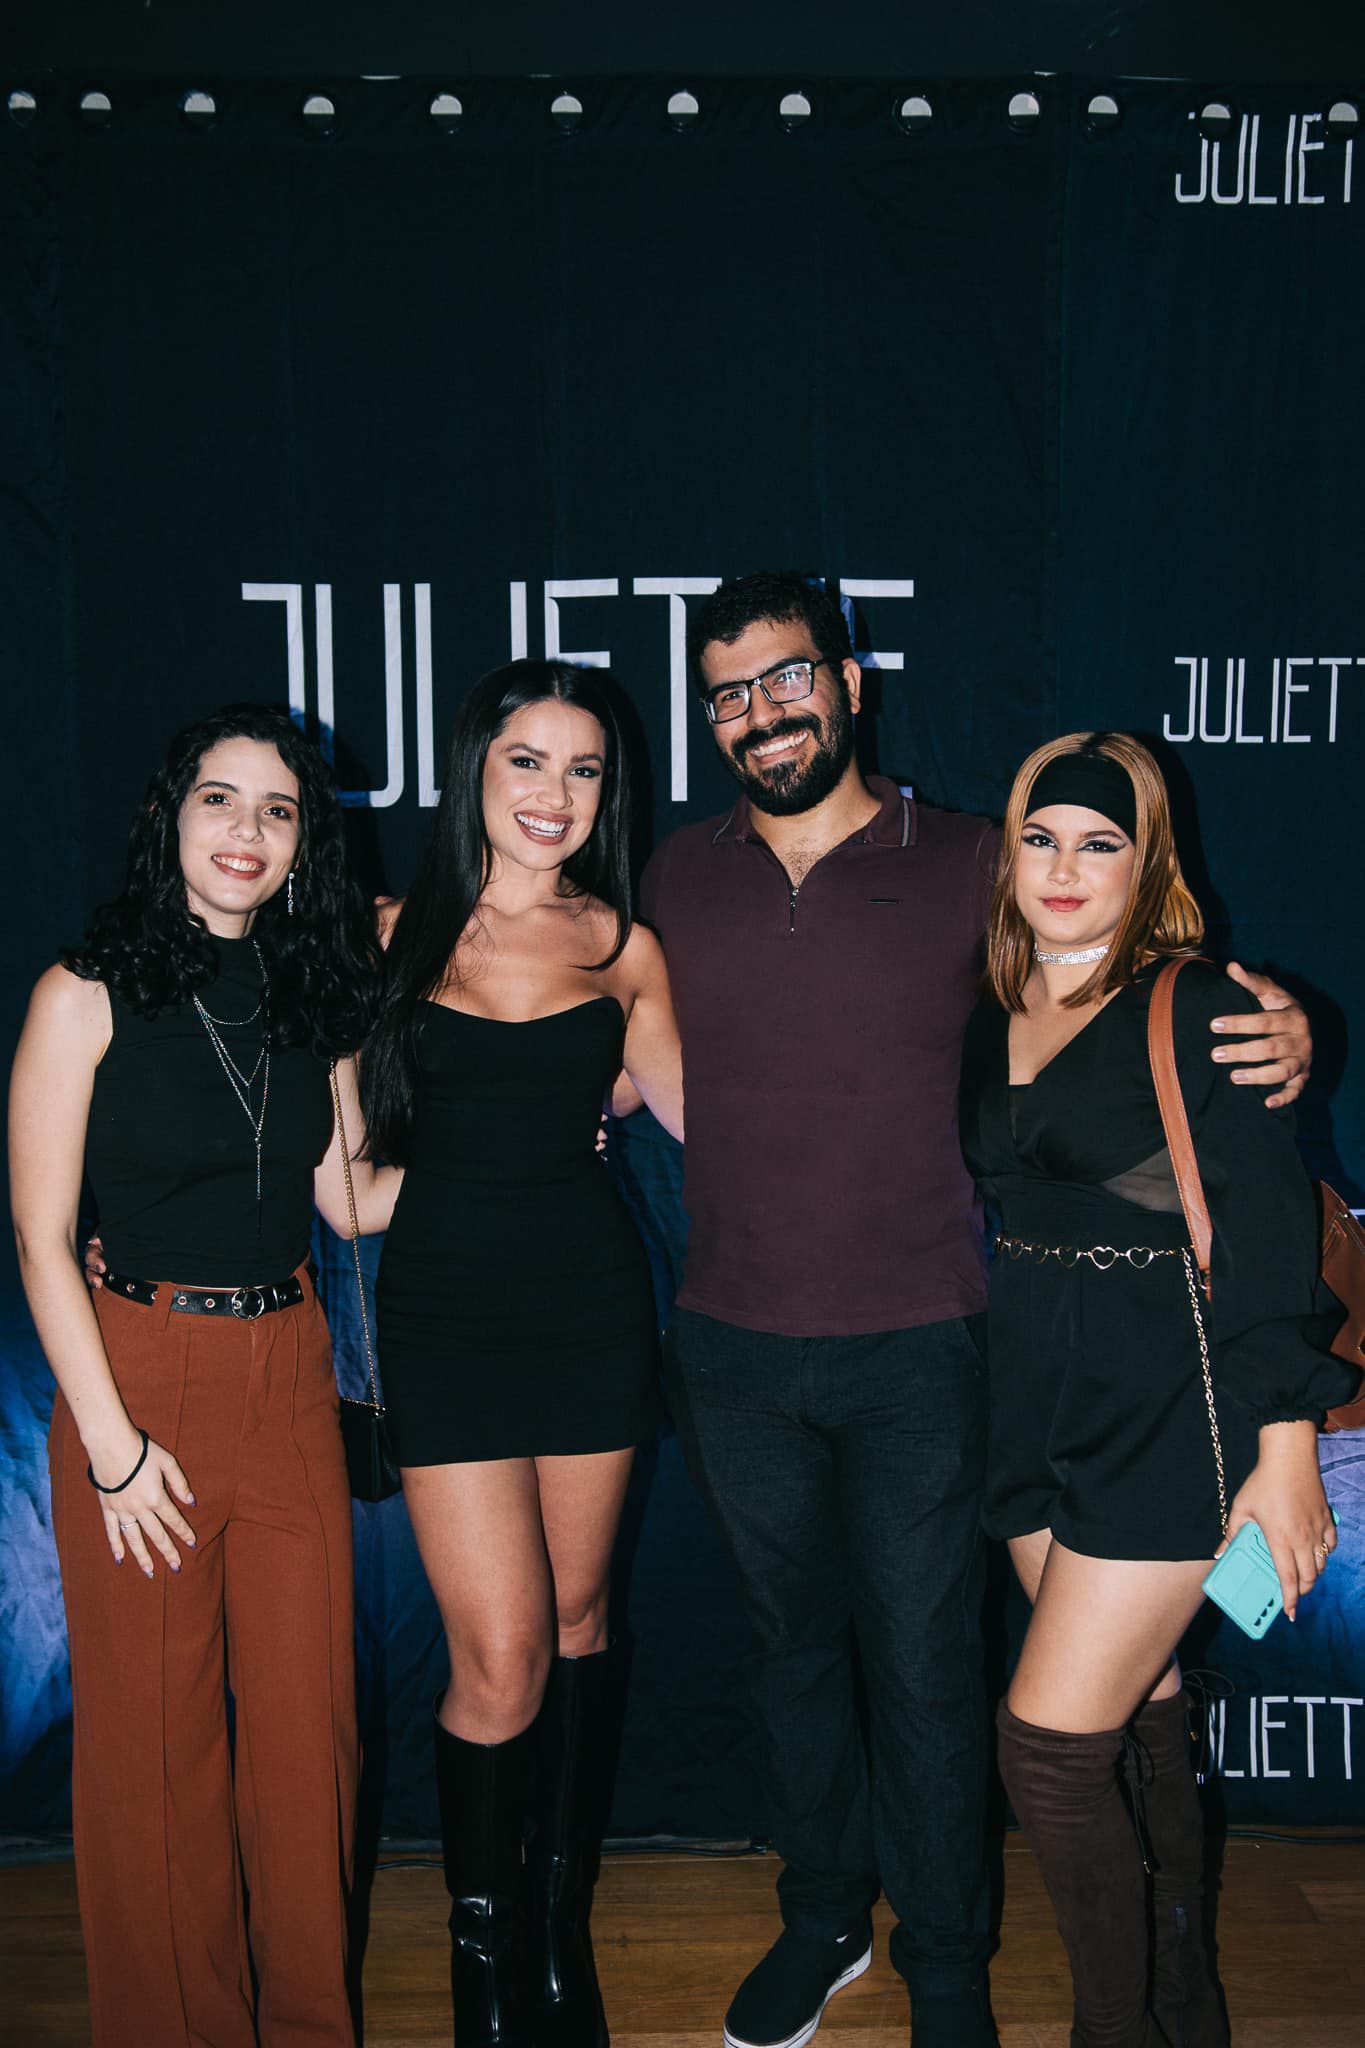 Ittalo meeting Juliette with some other fans. 